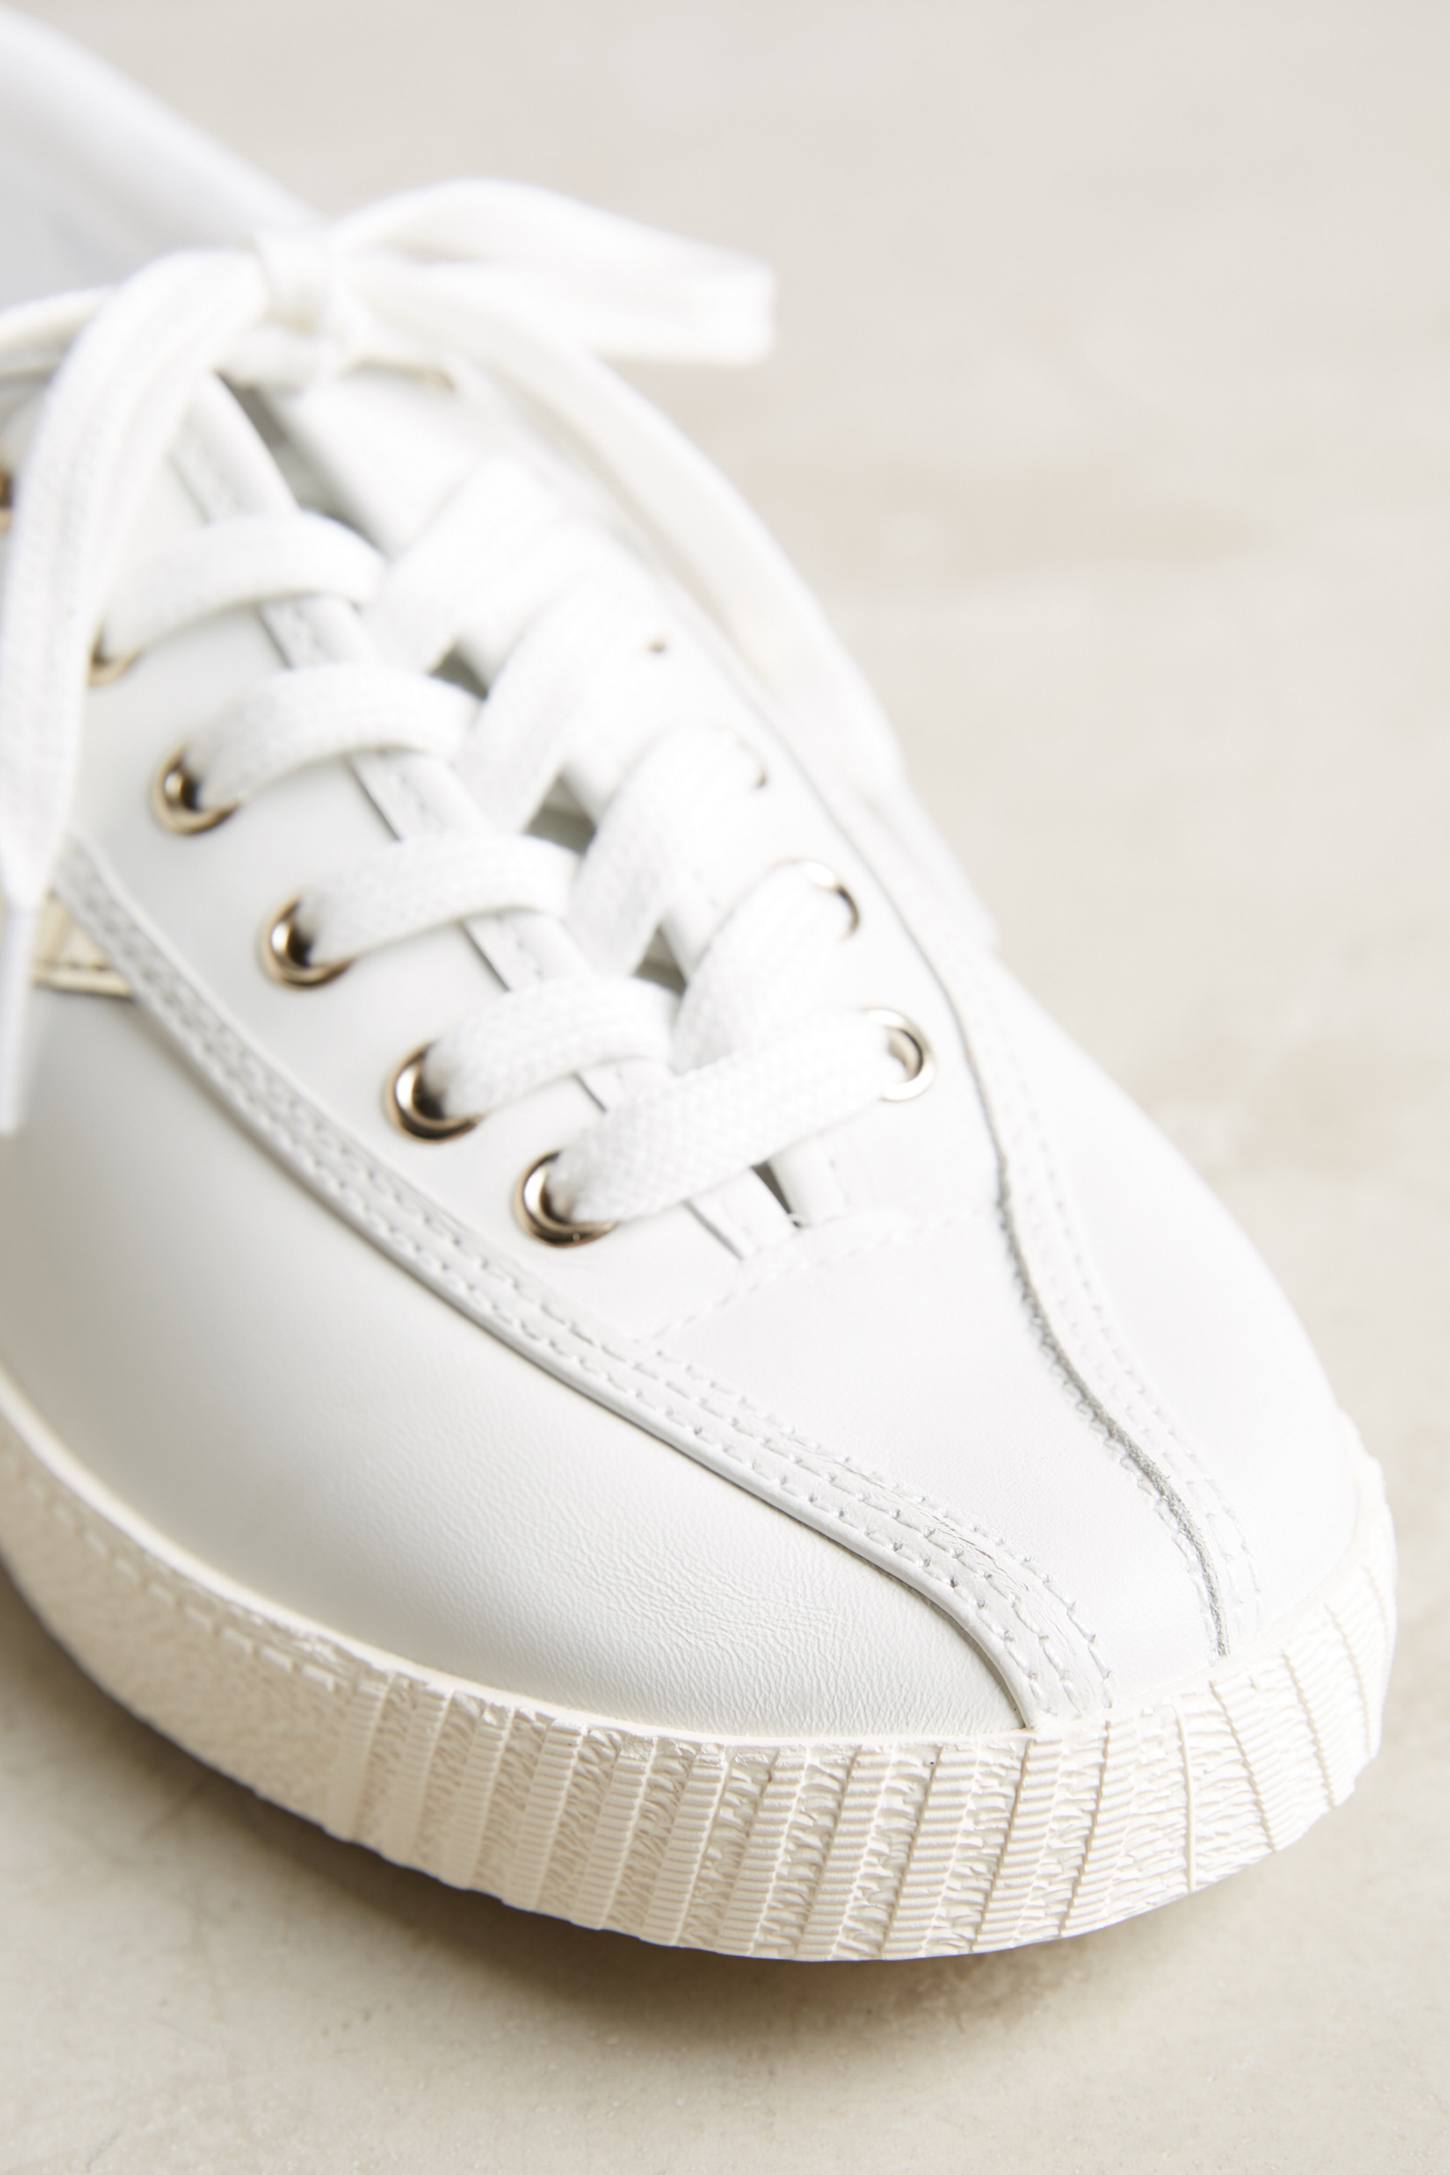 Tretorn Leather Sneakers | Anthropologie